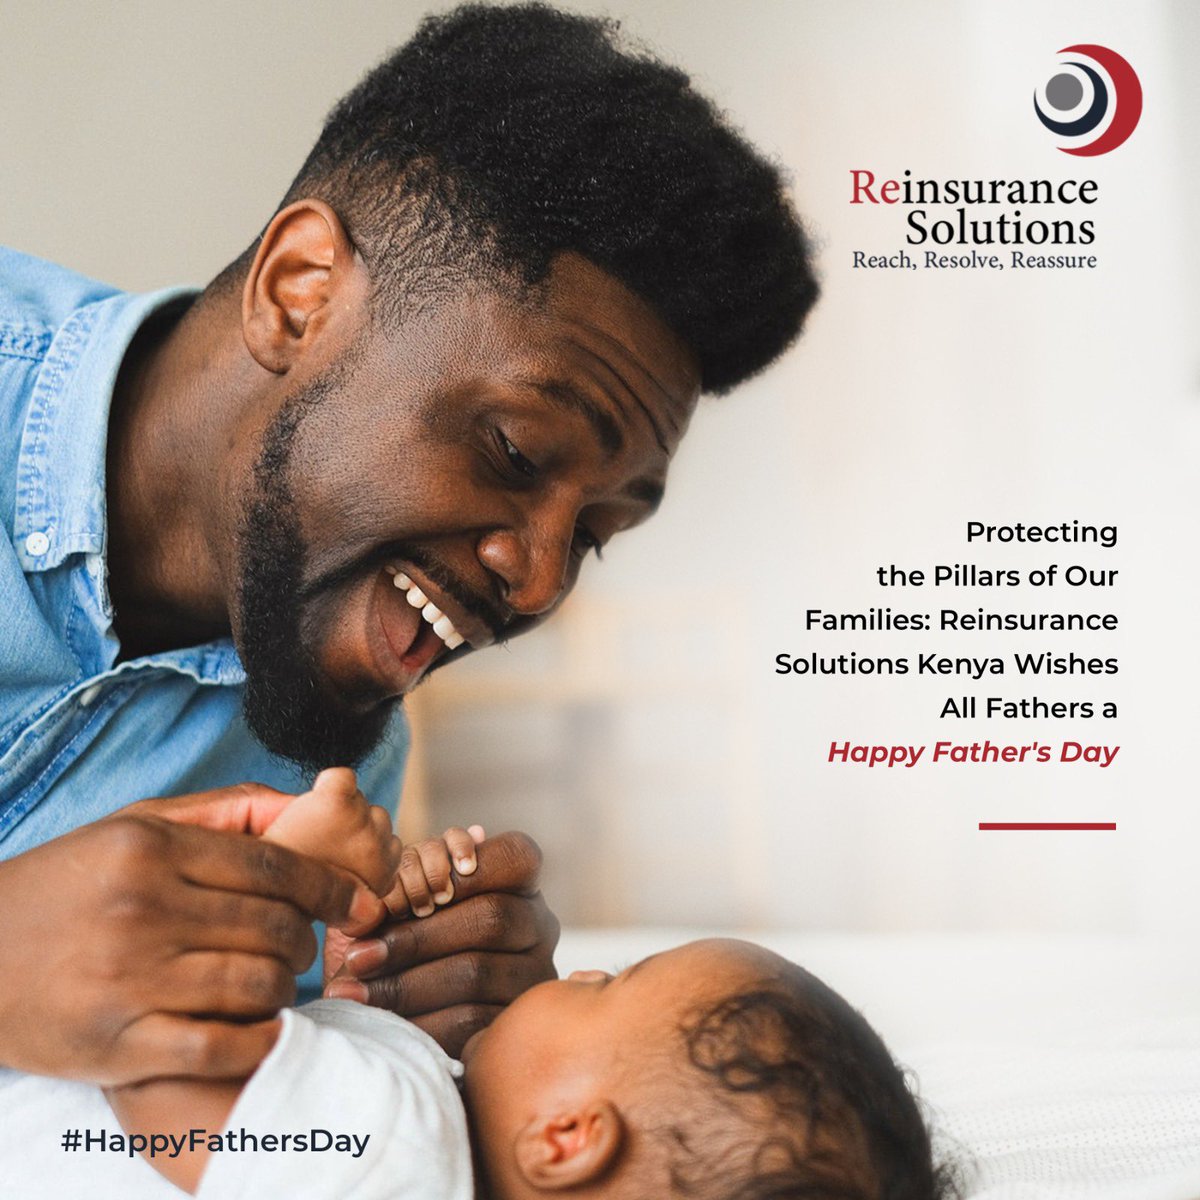 To all the incredible fathers who make a difference every day, Reinsurance Solutions sends heartfelt wishes for a Happy Father's Day. May your legacy be safeguarded, and your family's dreams realized. #HappyFathersDay #LegacyProtection #ReinsuranceSolutions